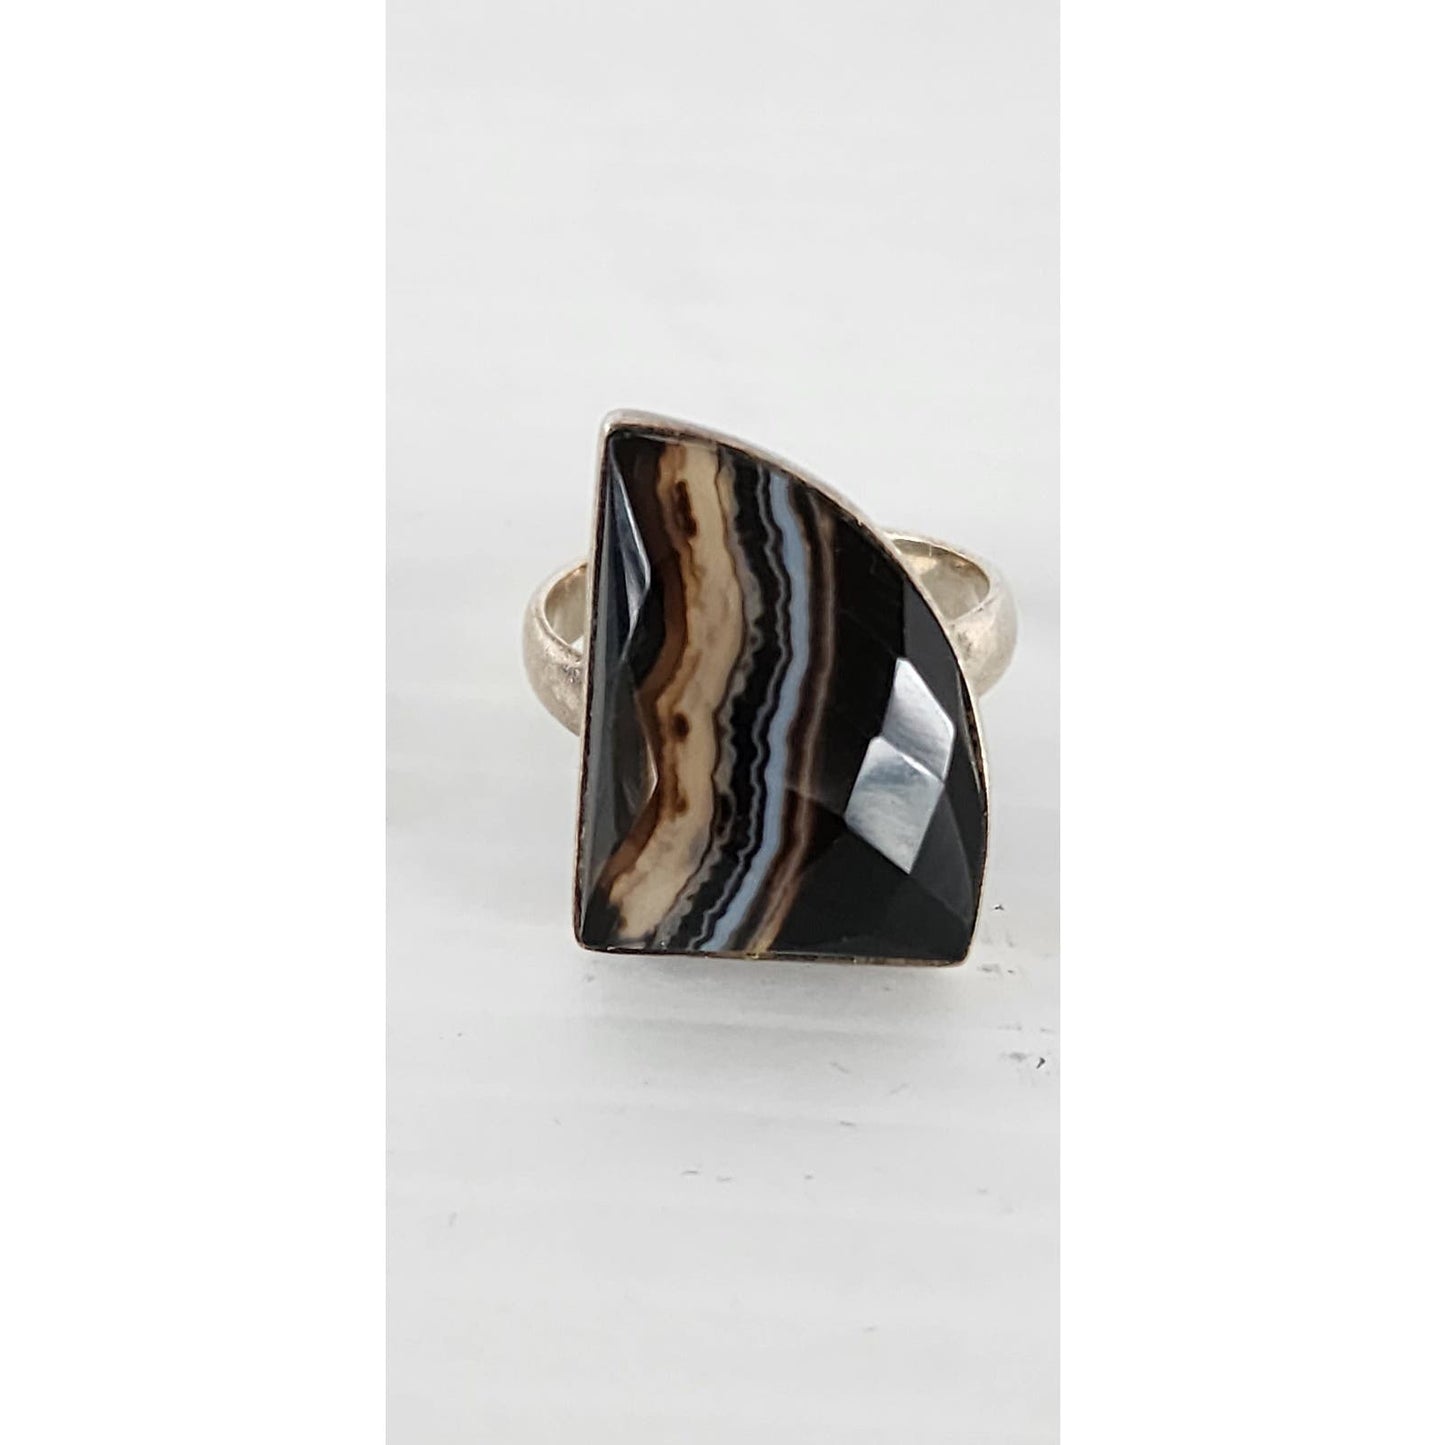 Vintage Ring Striped Onyx Sterling Silver Size 8